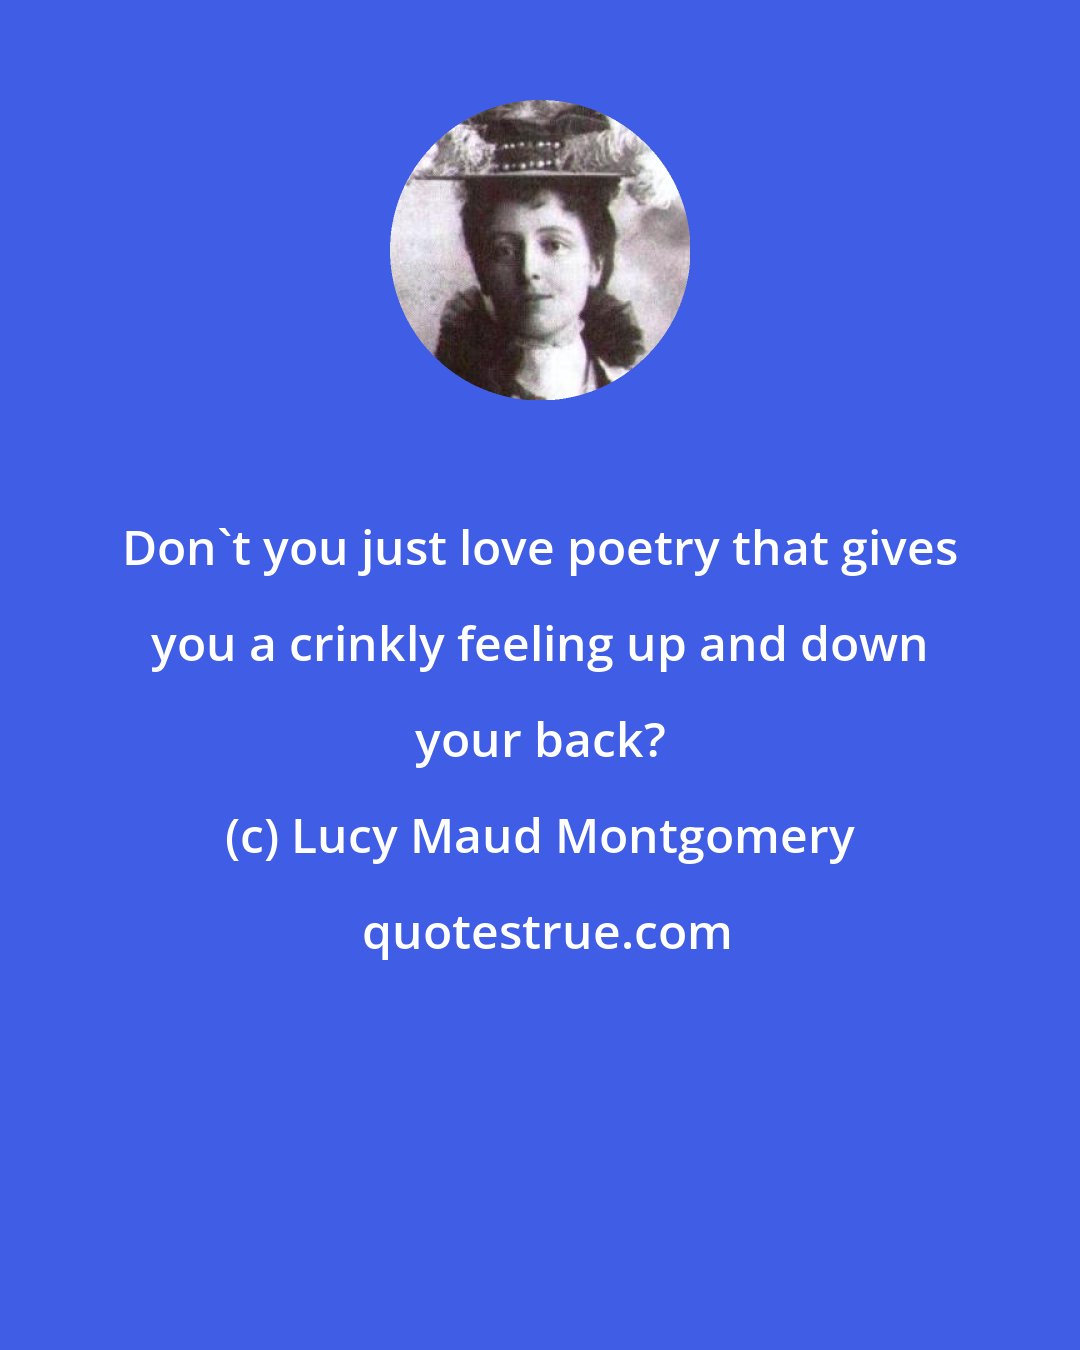 Lucy Maud Montgomery: Don't you just love poetry that gives you a crinkly feeling up and down your back?